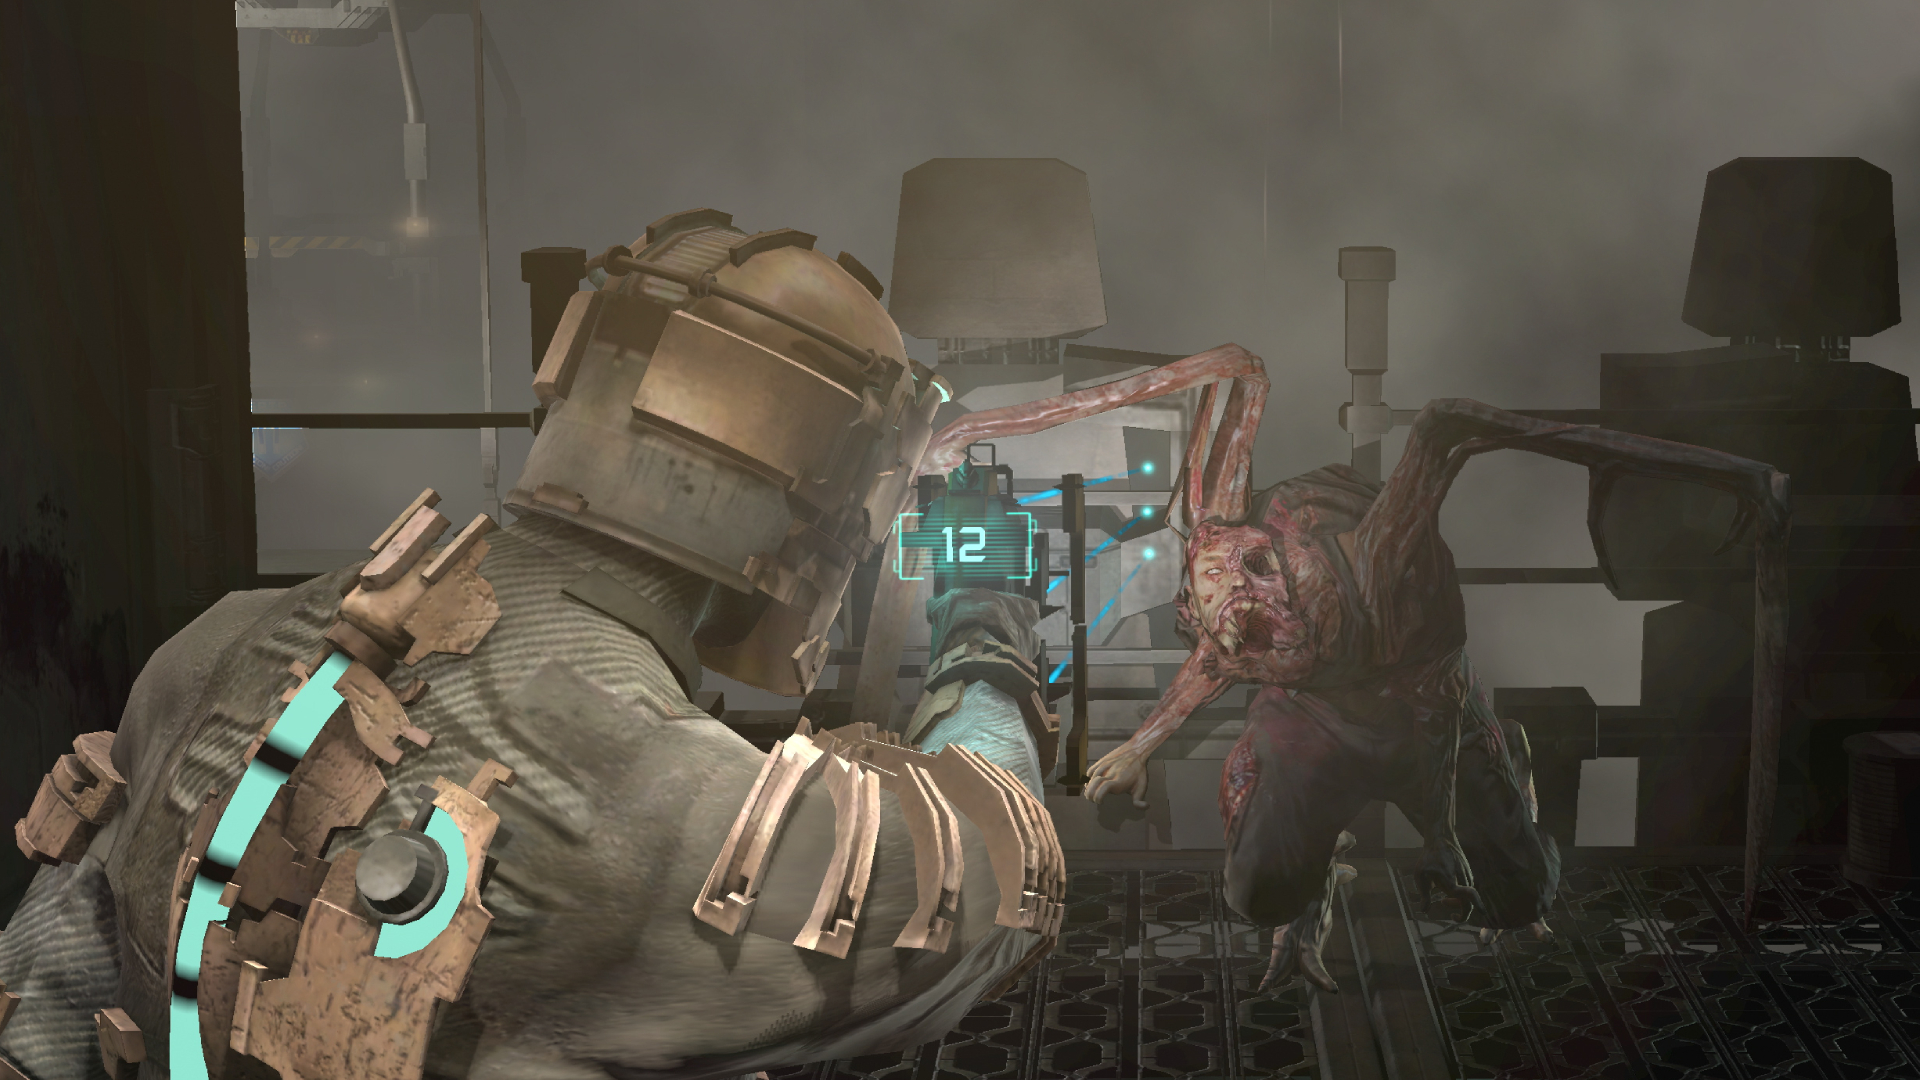 Playing the Dead Space remake made me realize I totally